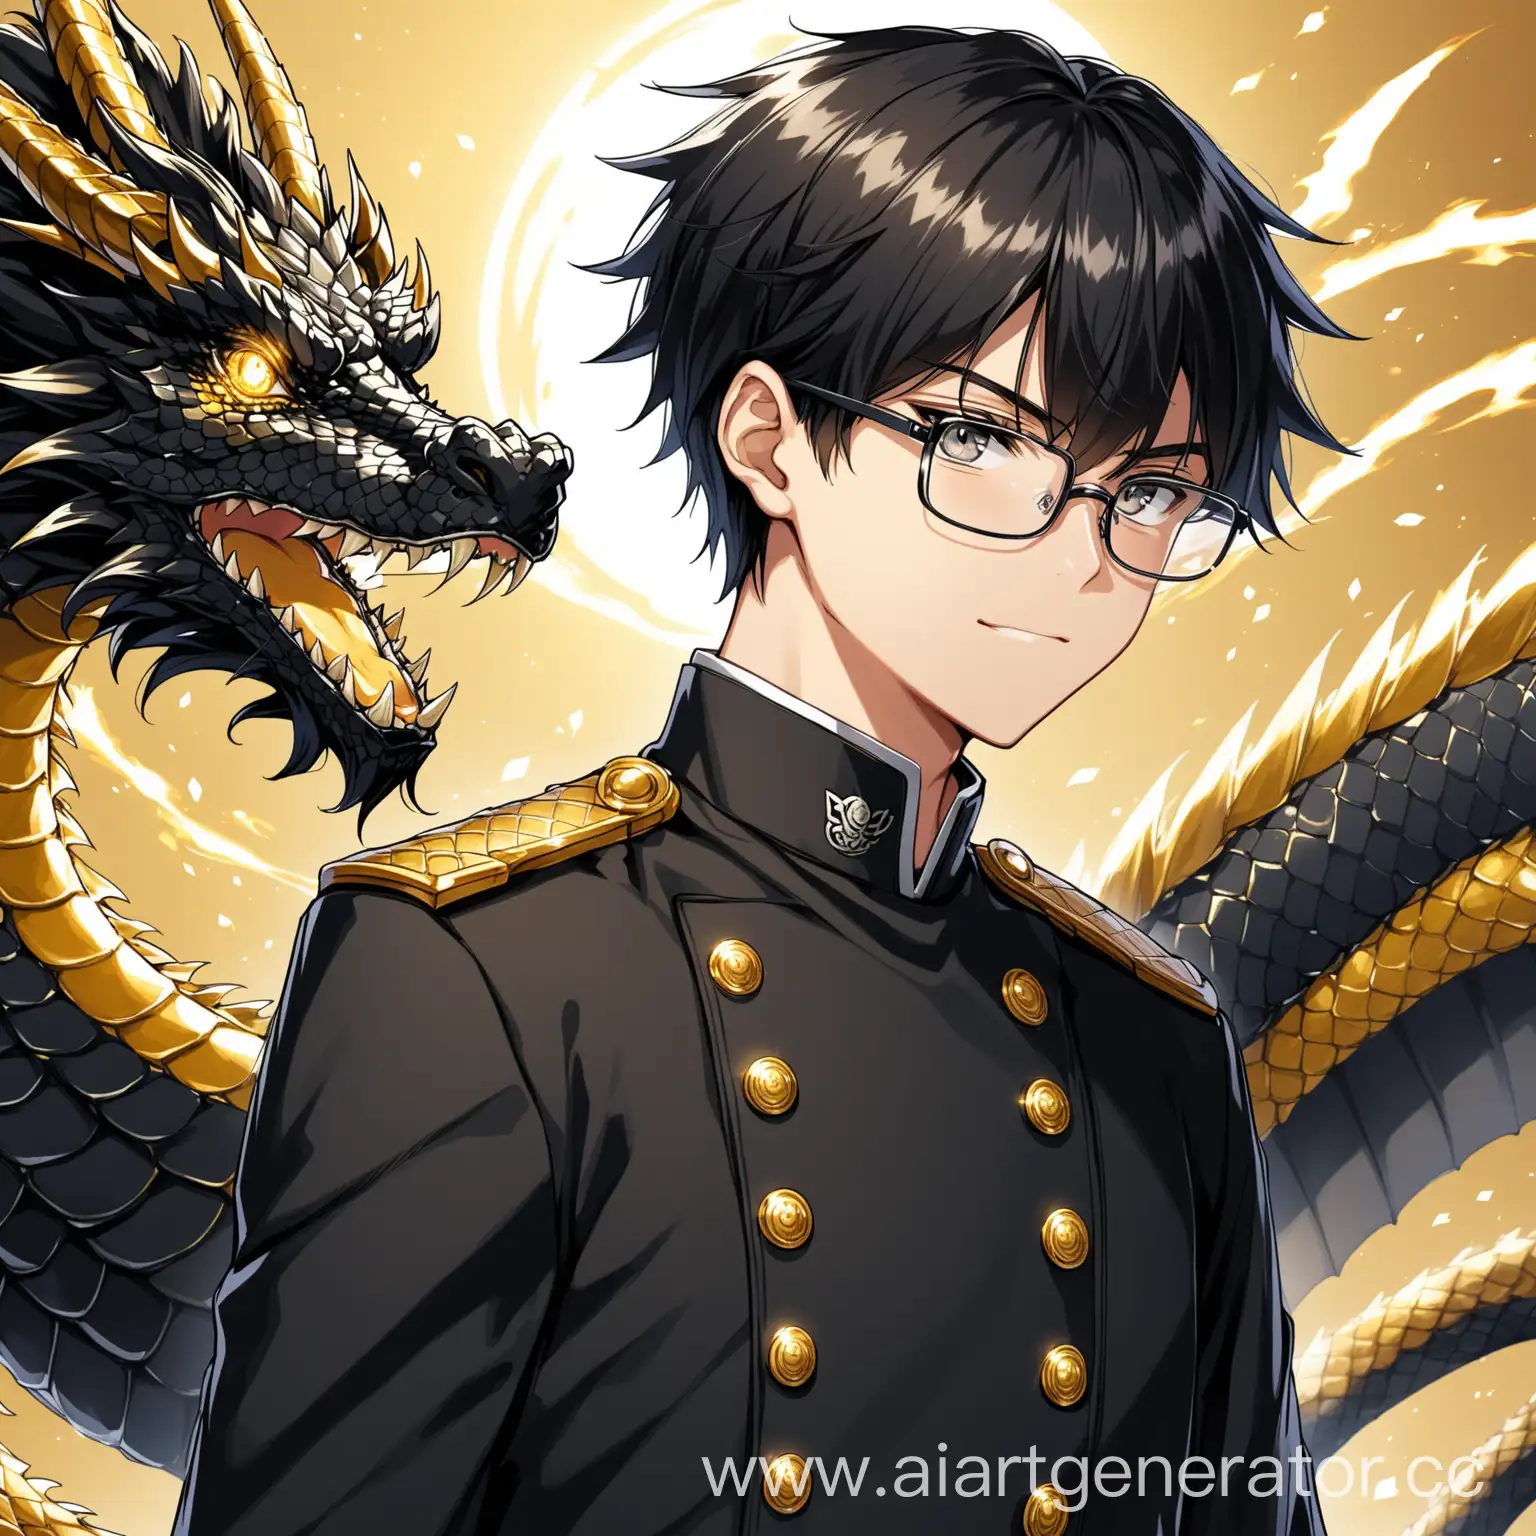 A 17-year-old guy with short black hair and gray eyes wearing glasses dressed in a black uniform and behind the guy is a black and gold dragon